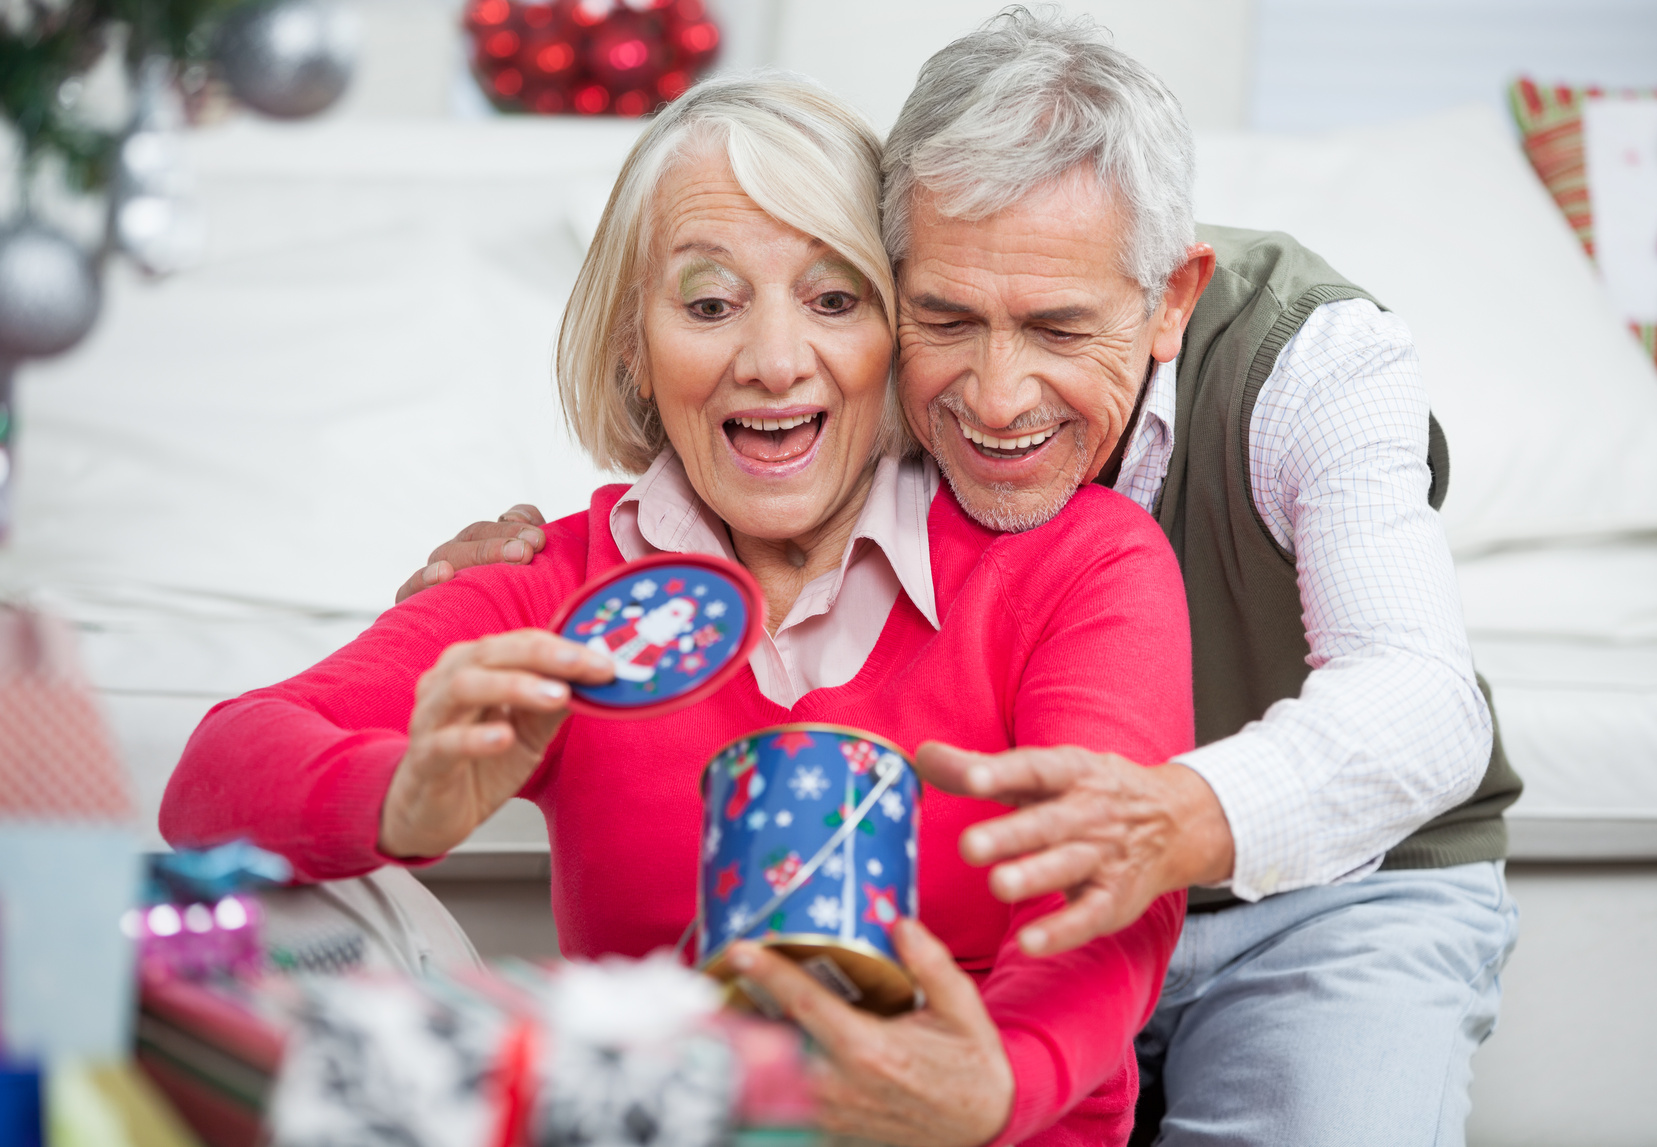 Surprised Senior Woman With Man Looking At Christmas Gift